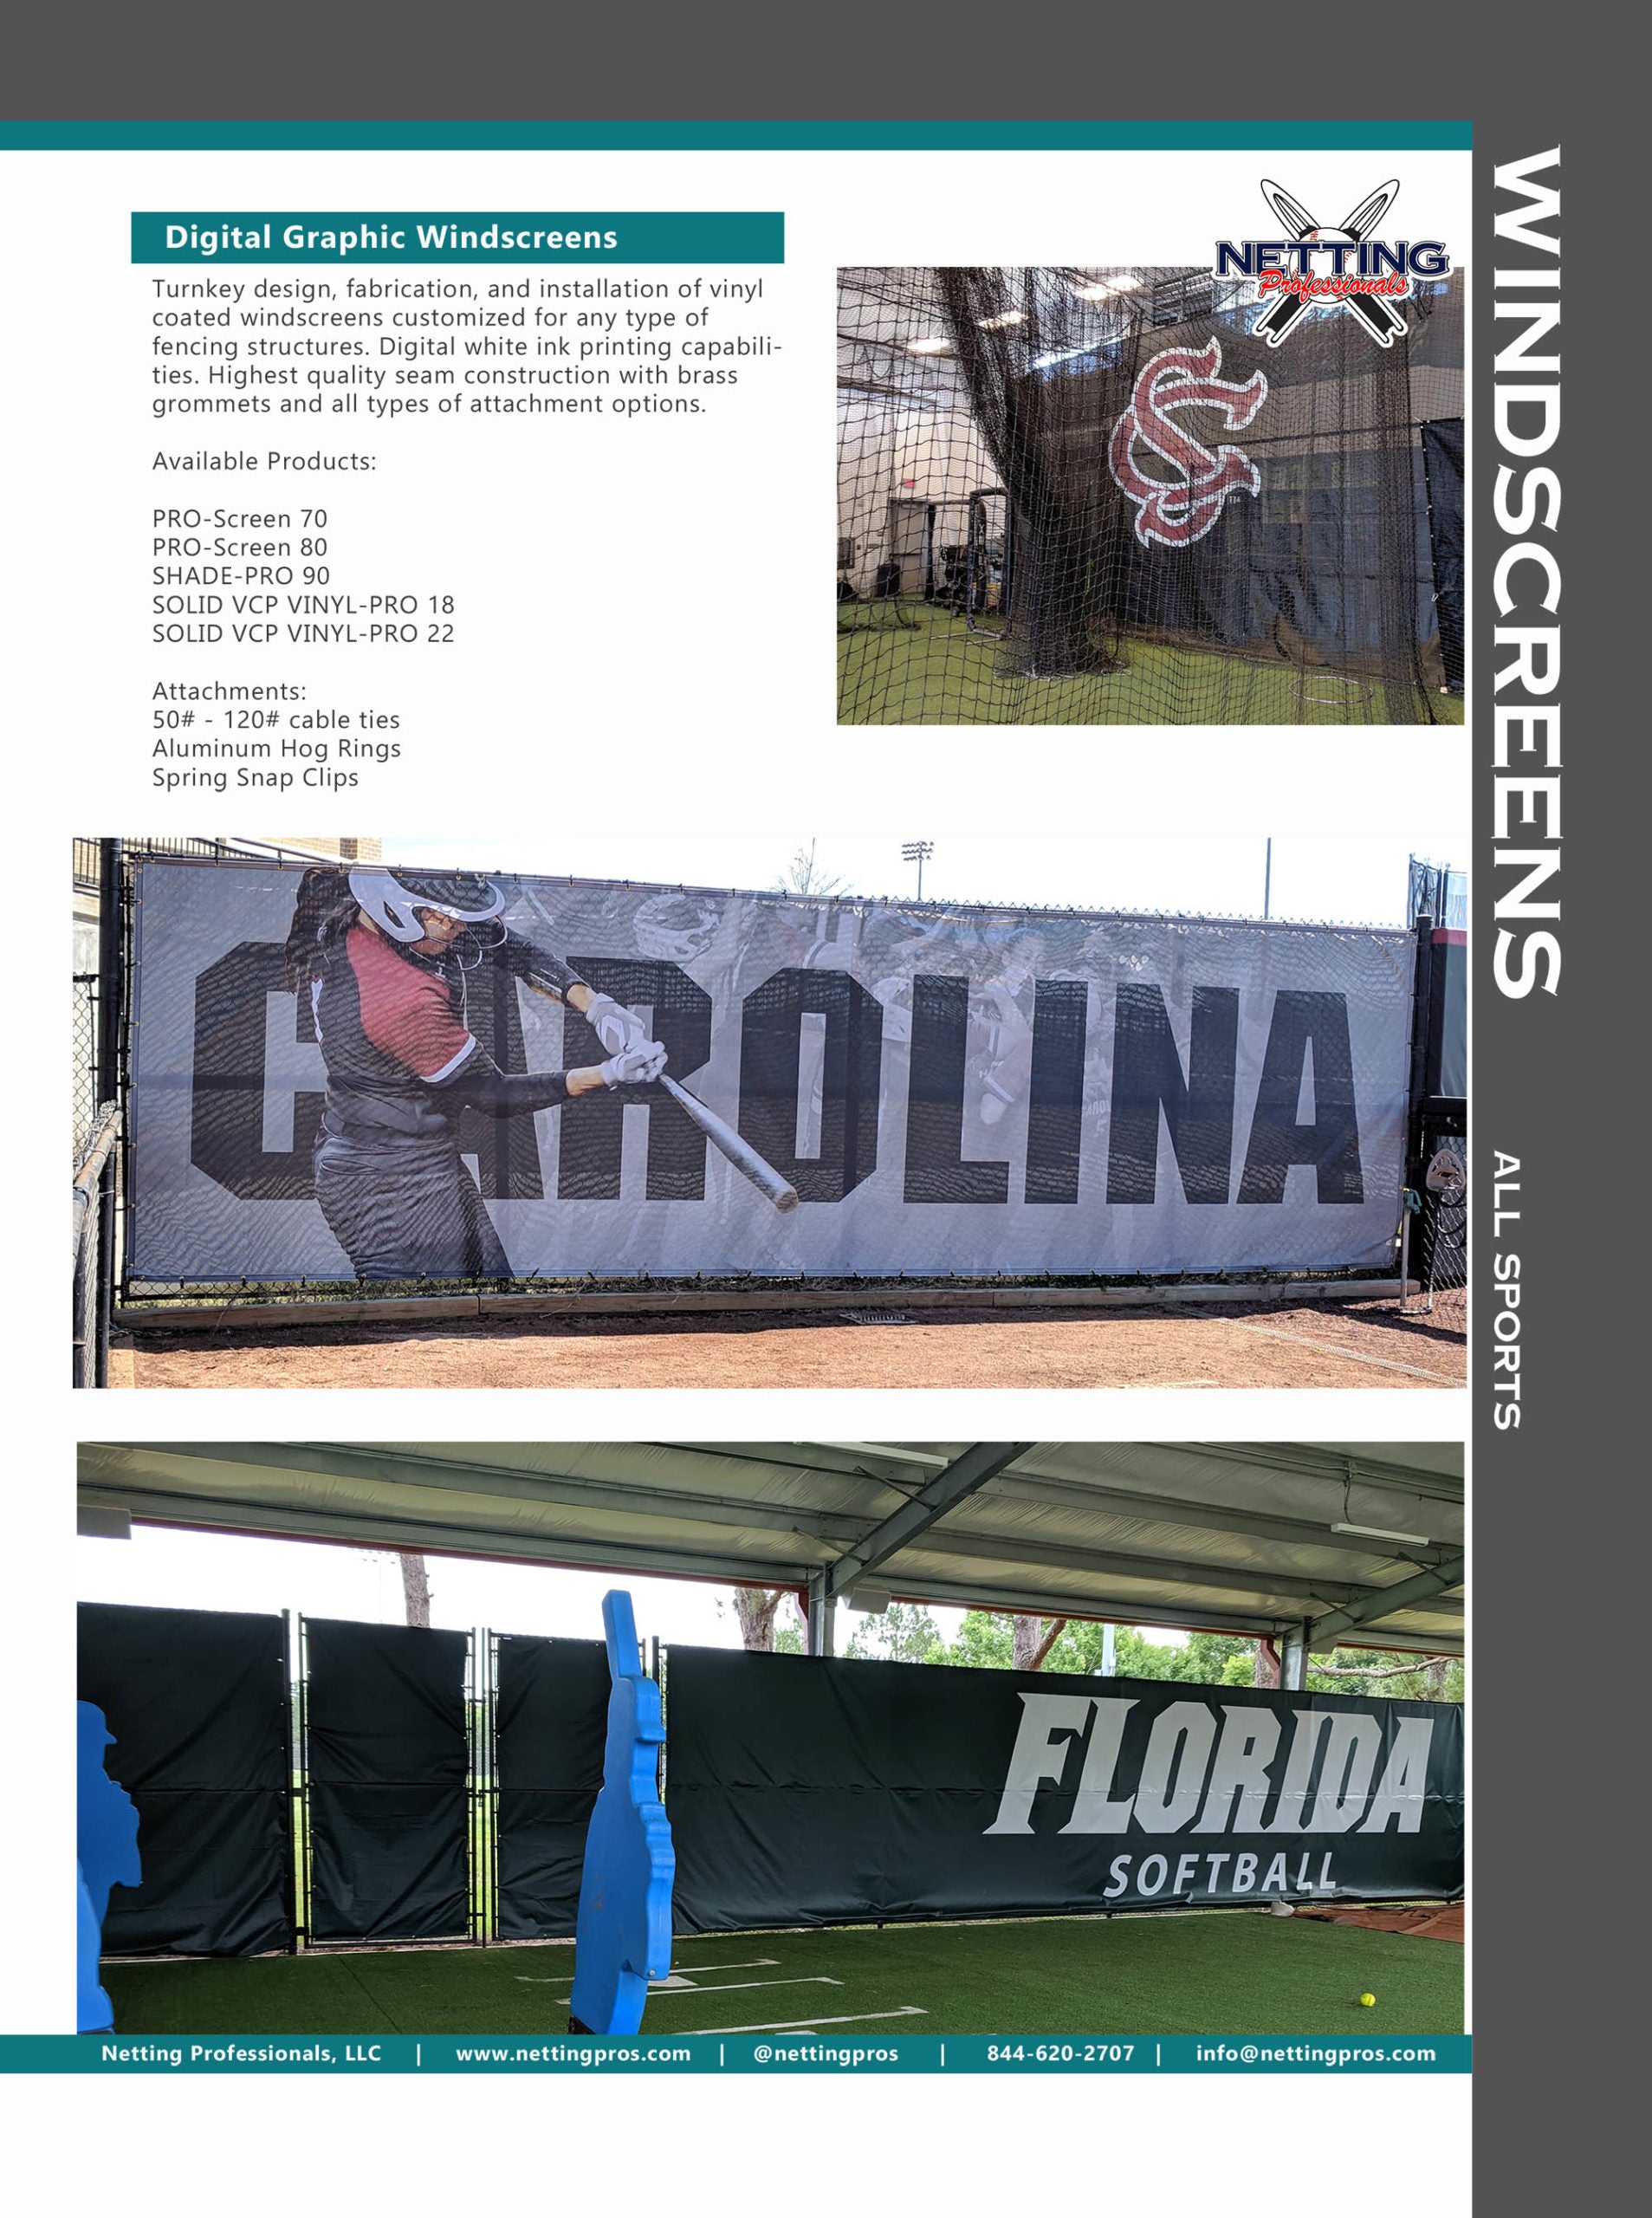 A page of several different photos with the words " florida softball ".